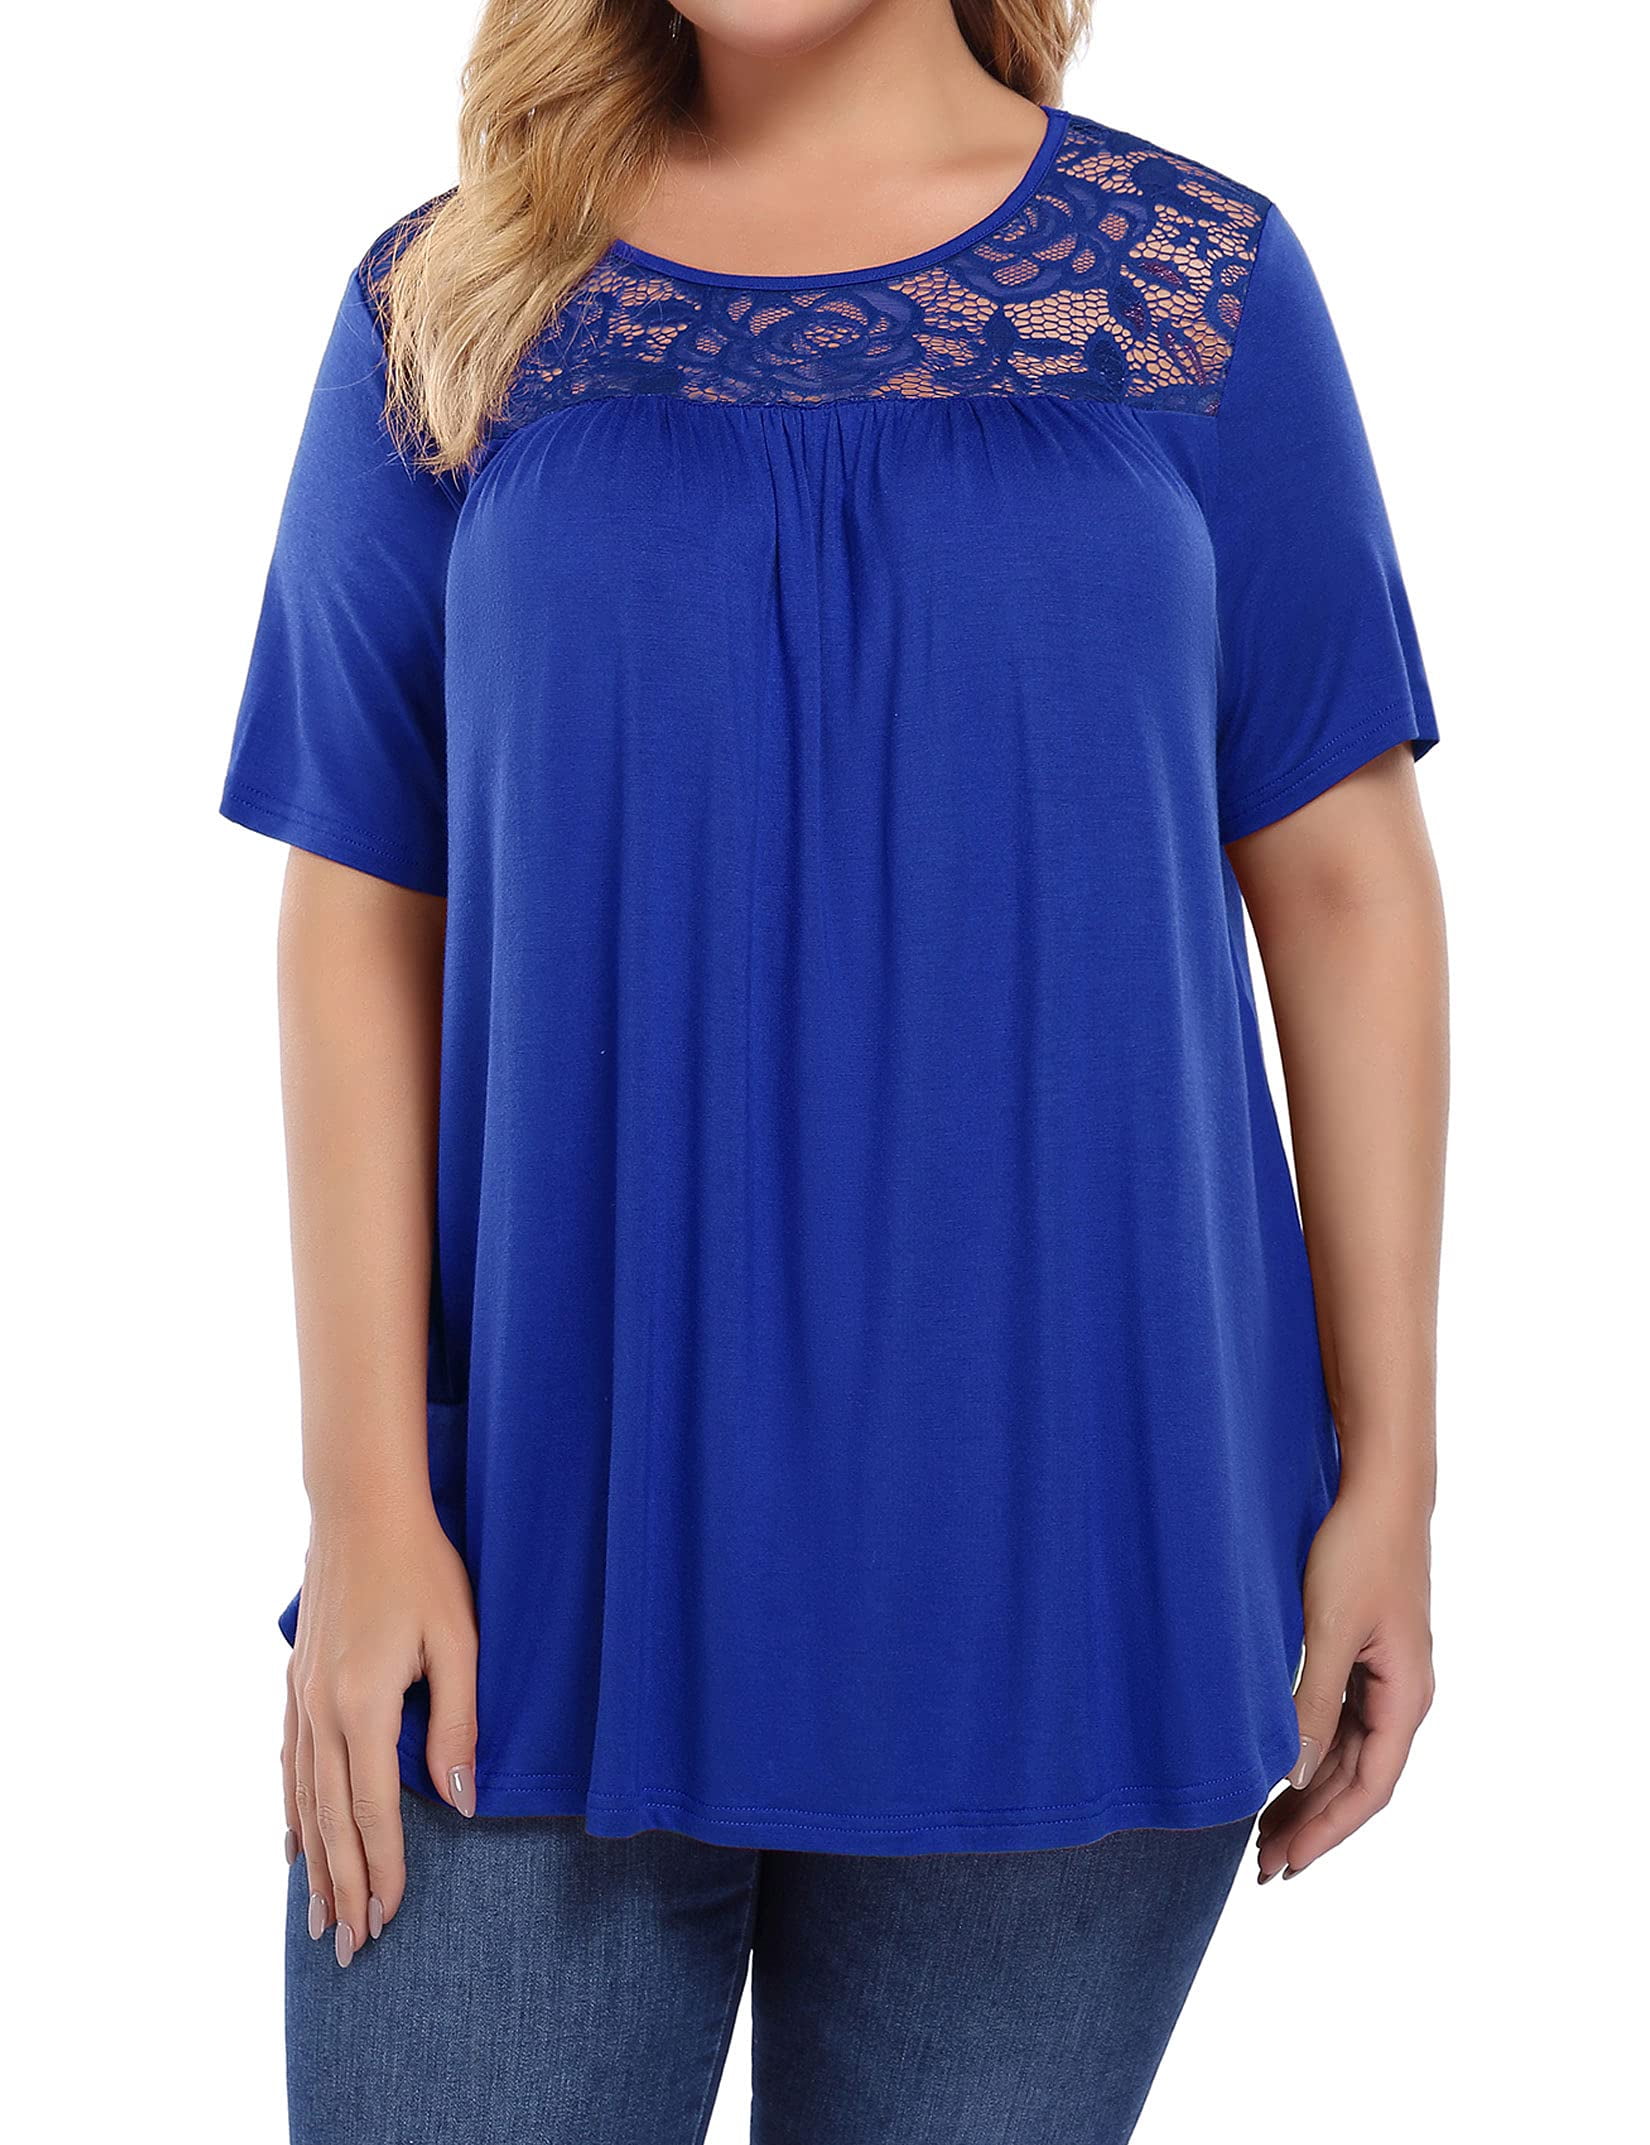 Rivelino Women's Plus Size Summer Tops Short Sleeve Shirts Lace Pleated  Tunic Tops Blouses 